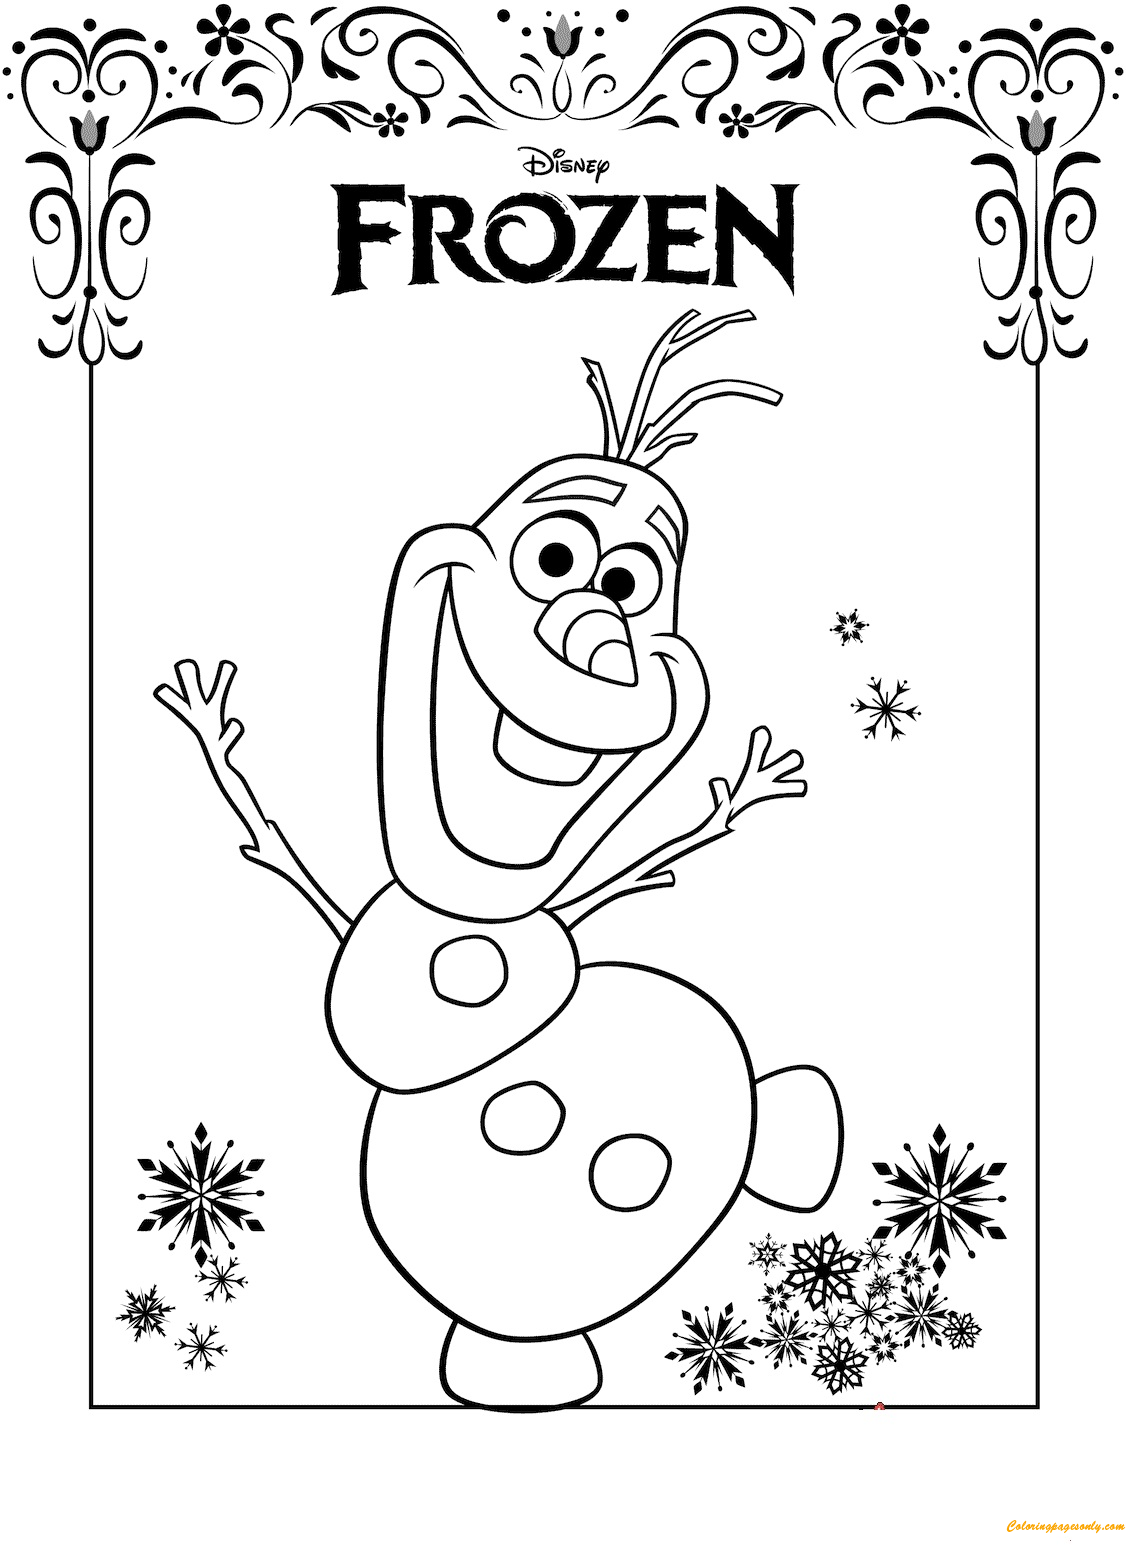 Friendly Olaf Frozen Coloring Page - Free Coloring Pages Online